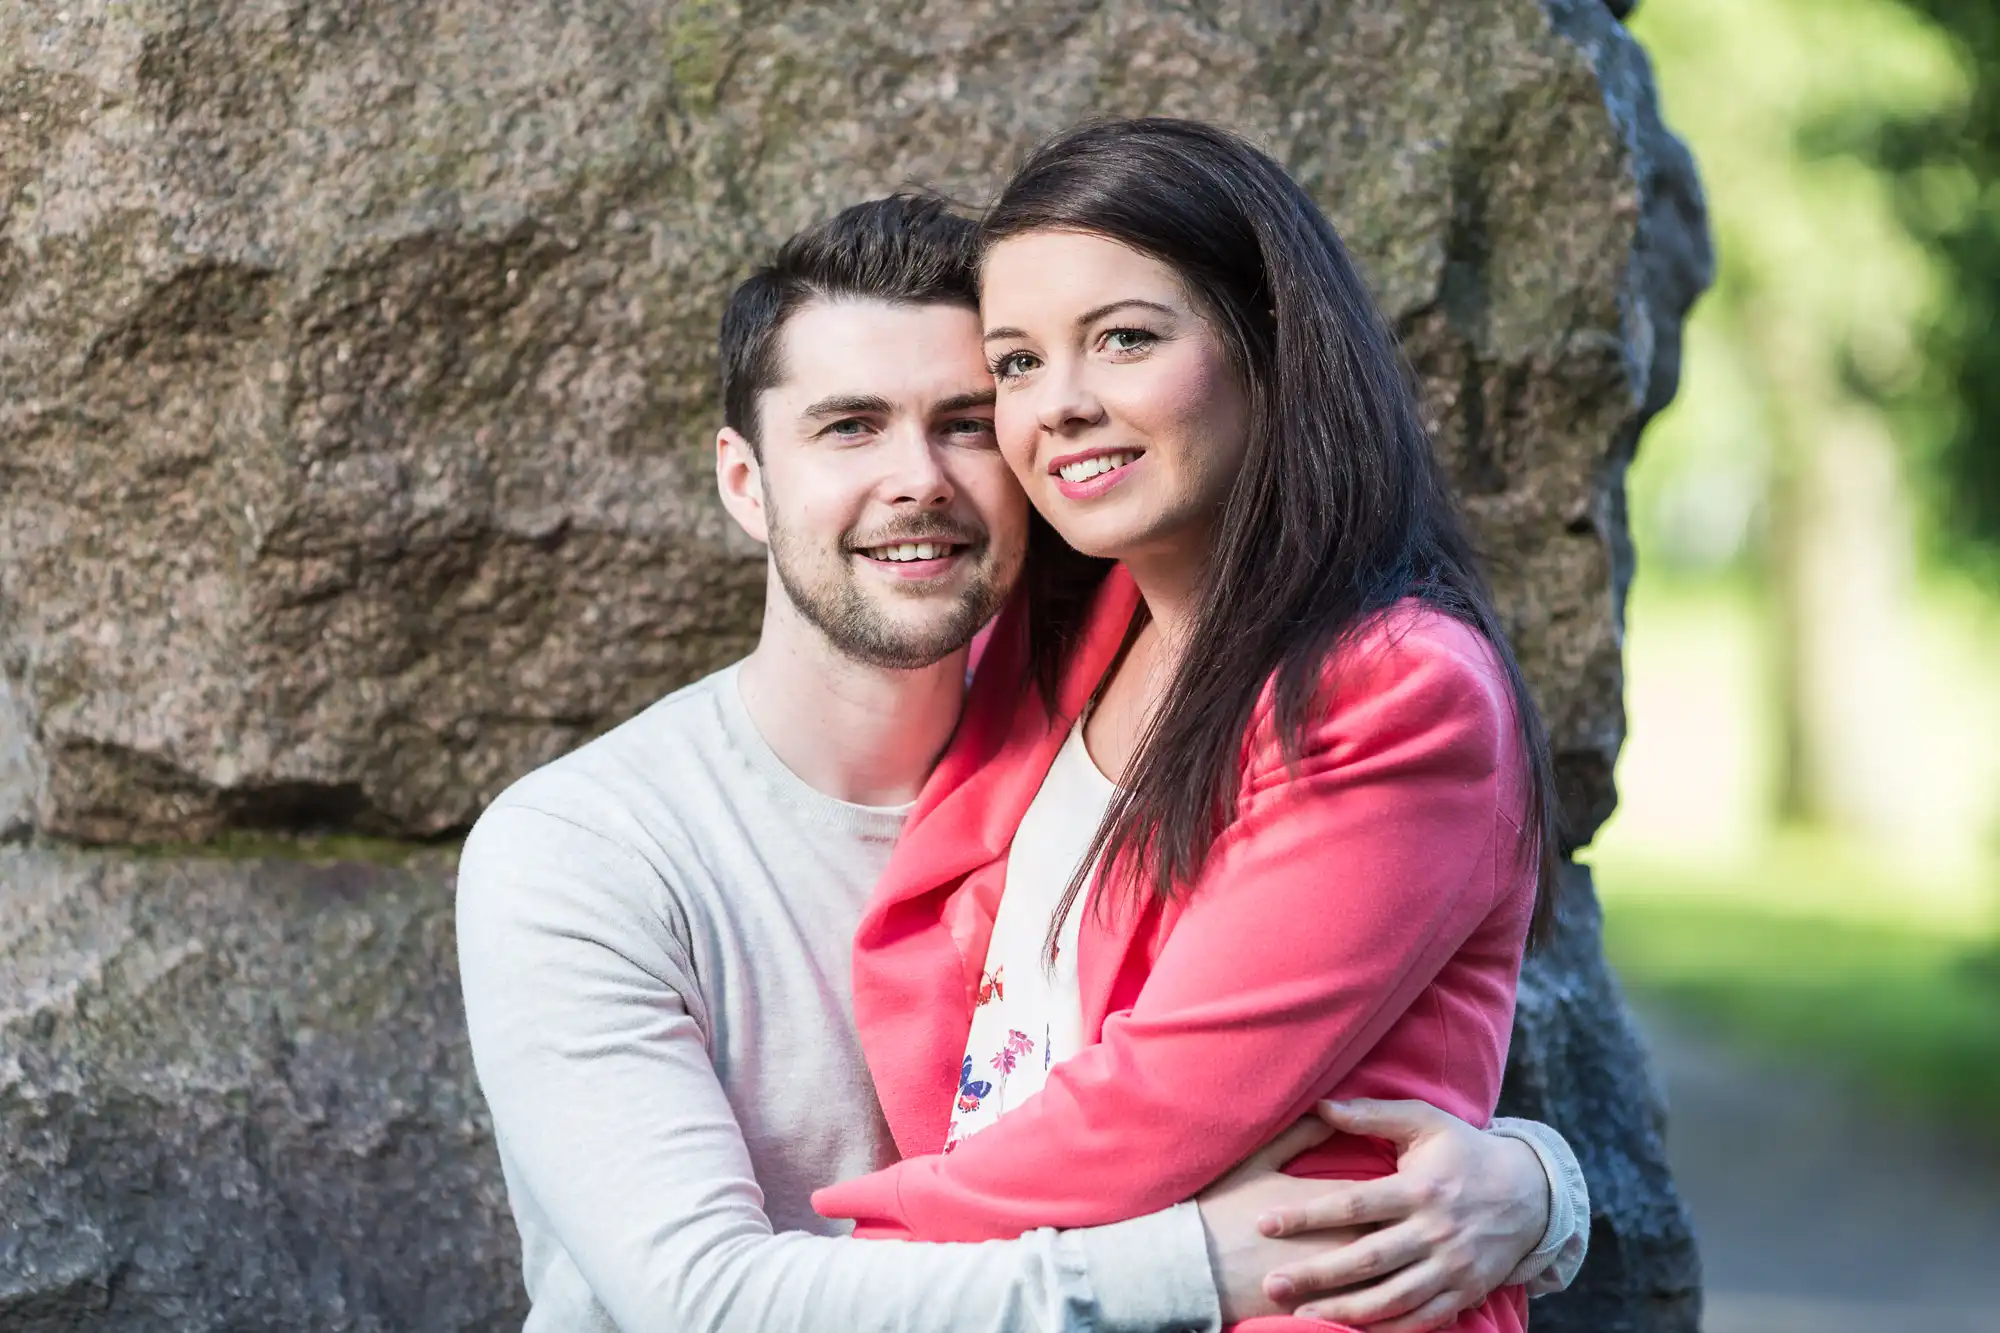 A smiling couple embracing each other in front of a large rock in a sunny park setting.